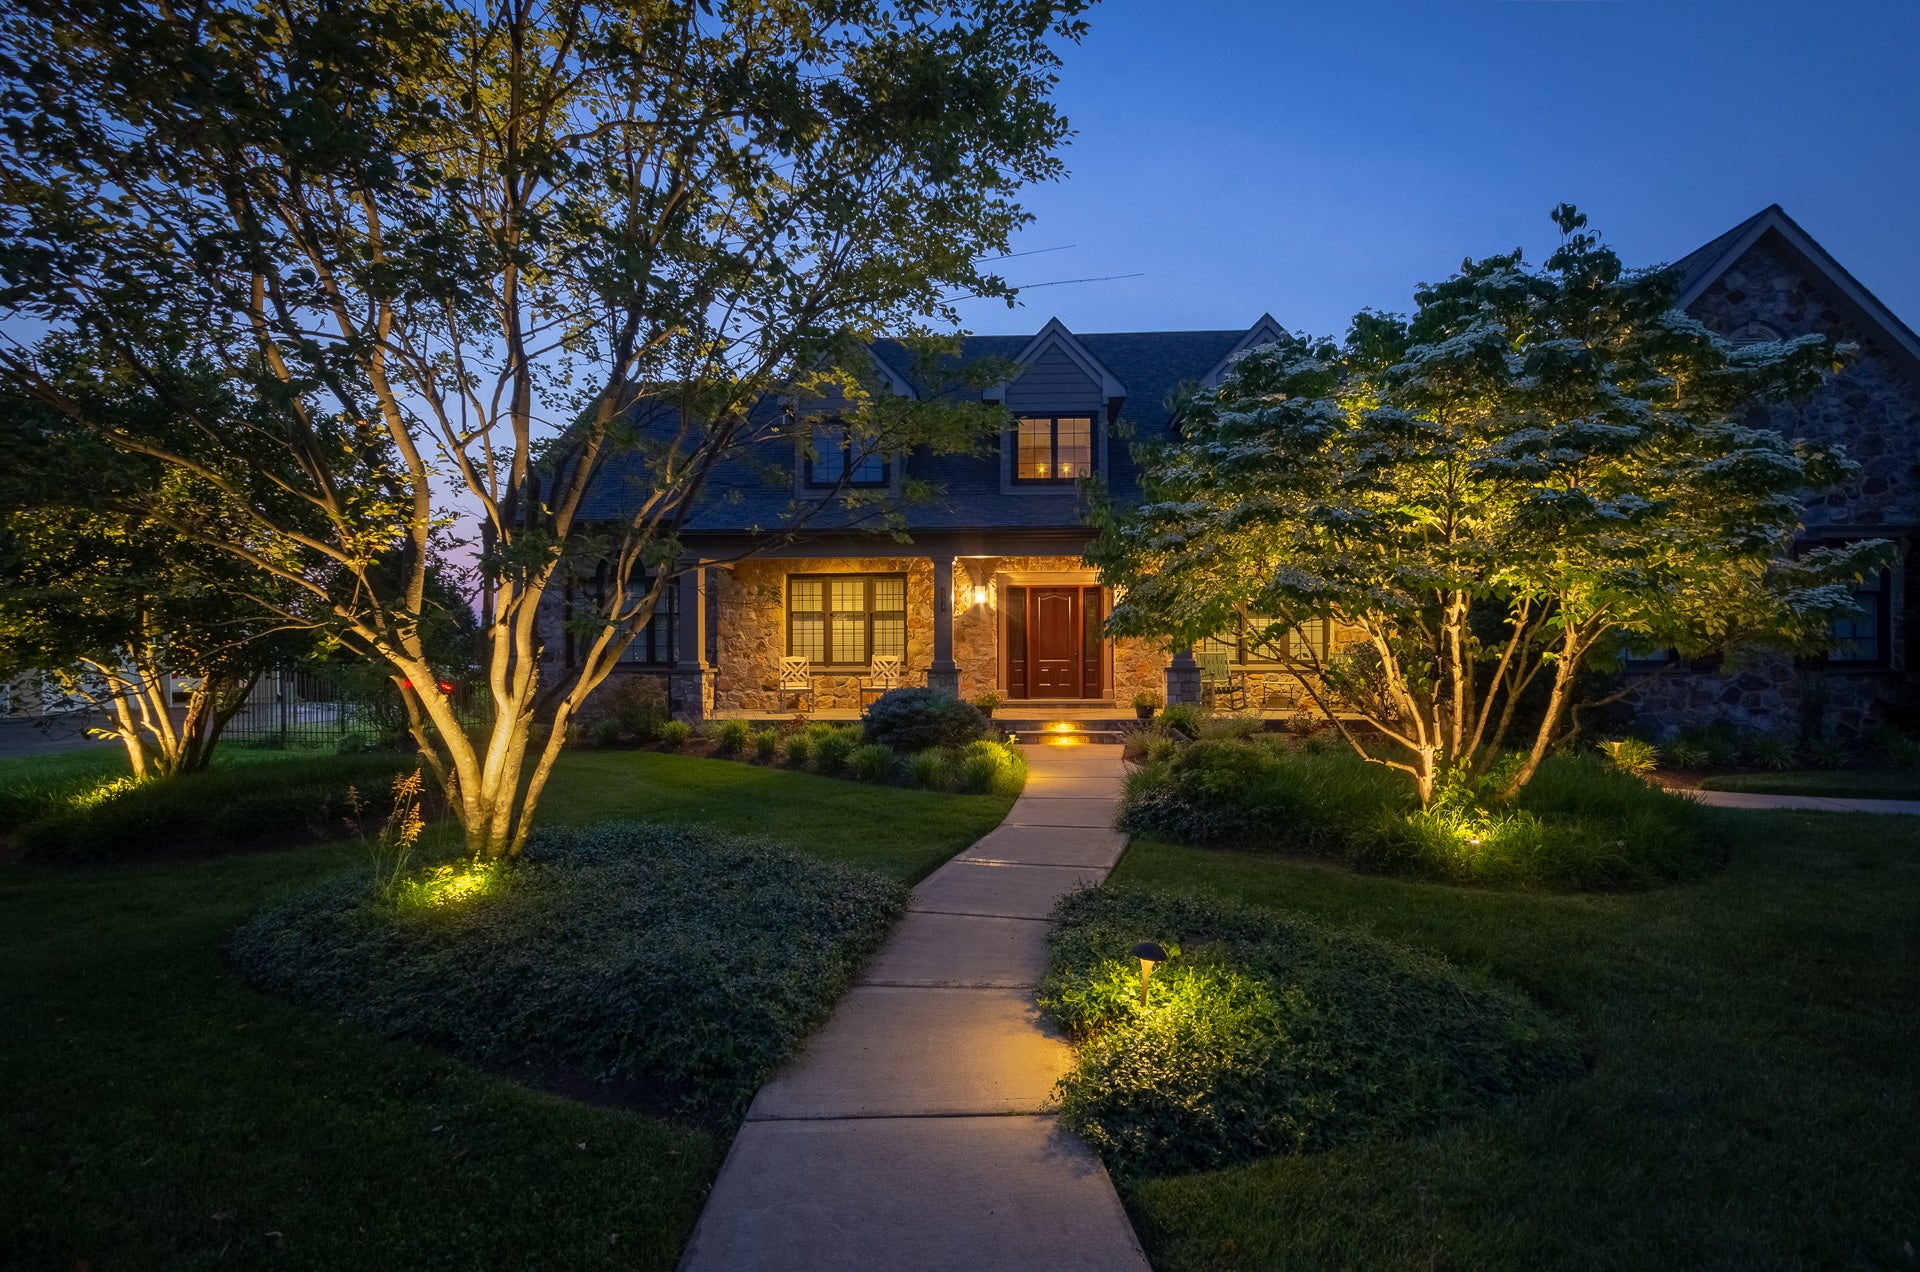 The Art of Illumination Using Solar Lights for Perfect Landscaping